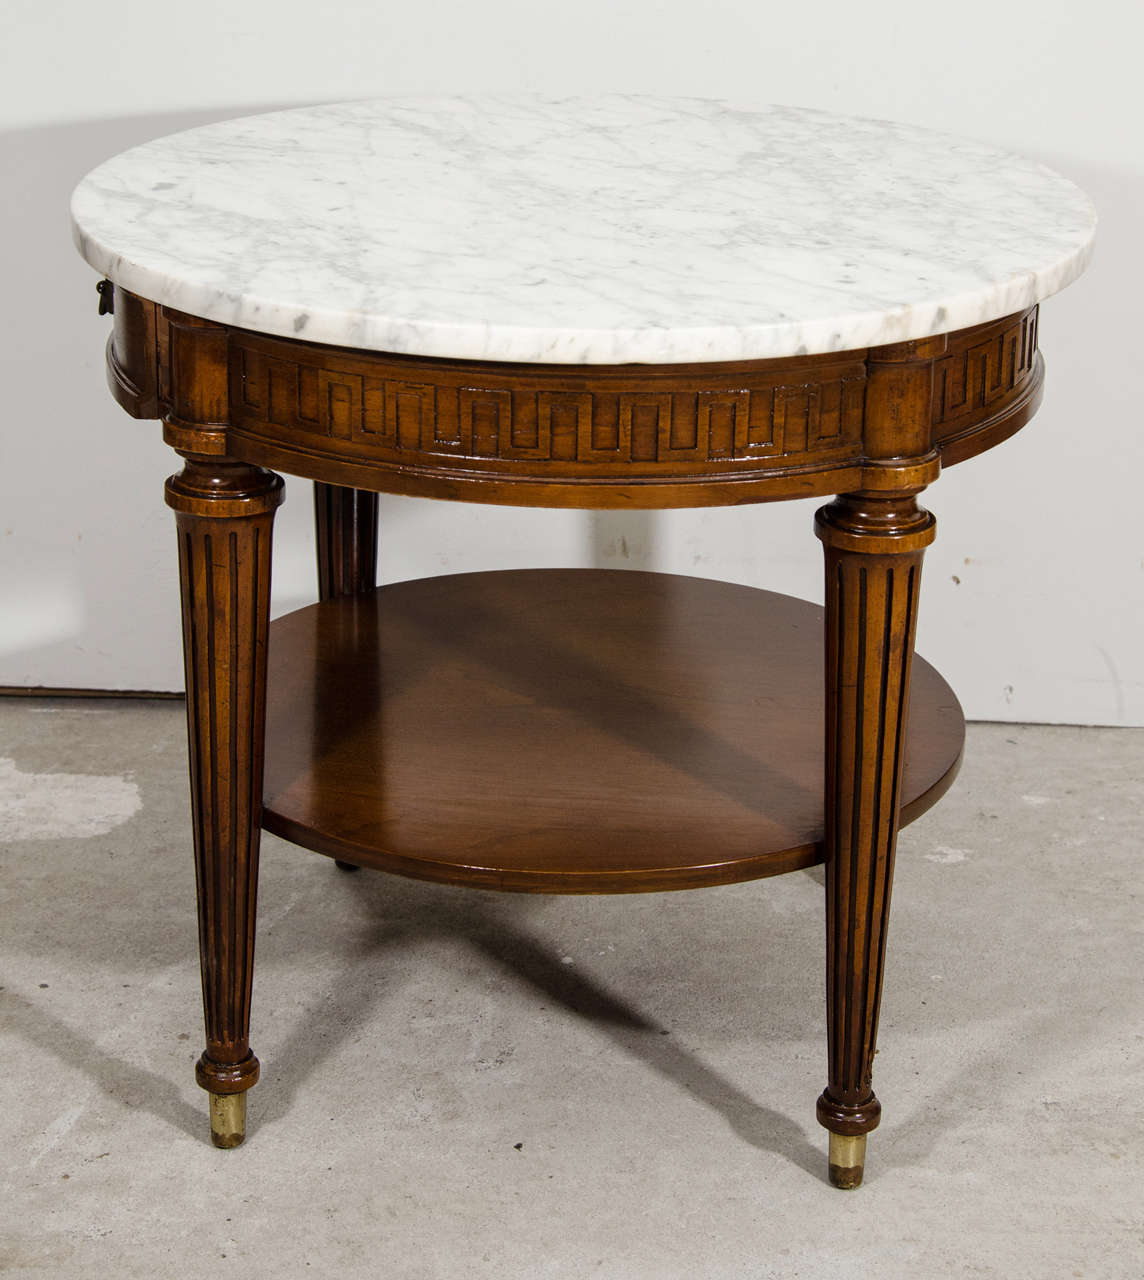 Pair of french bouillotte marble top side tables, Louis XVI style.